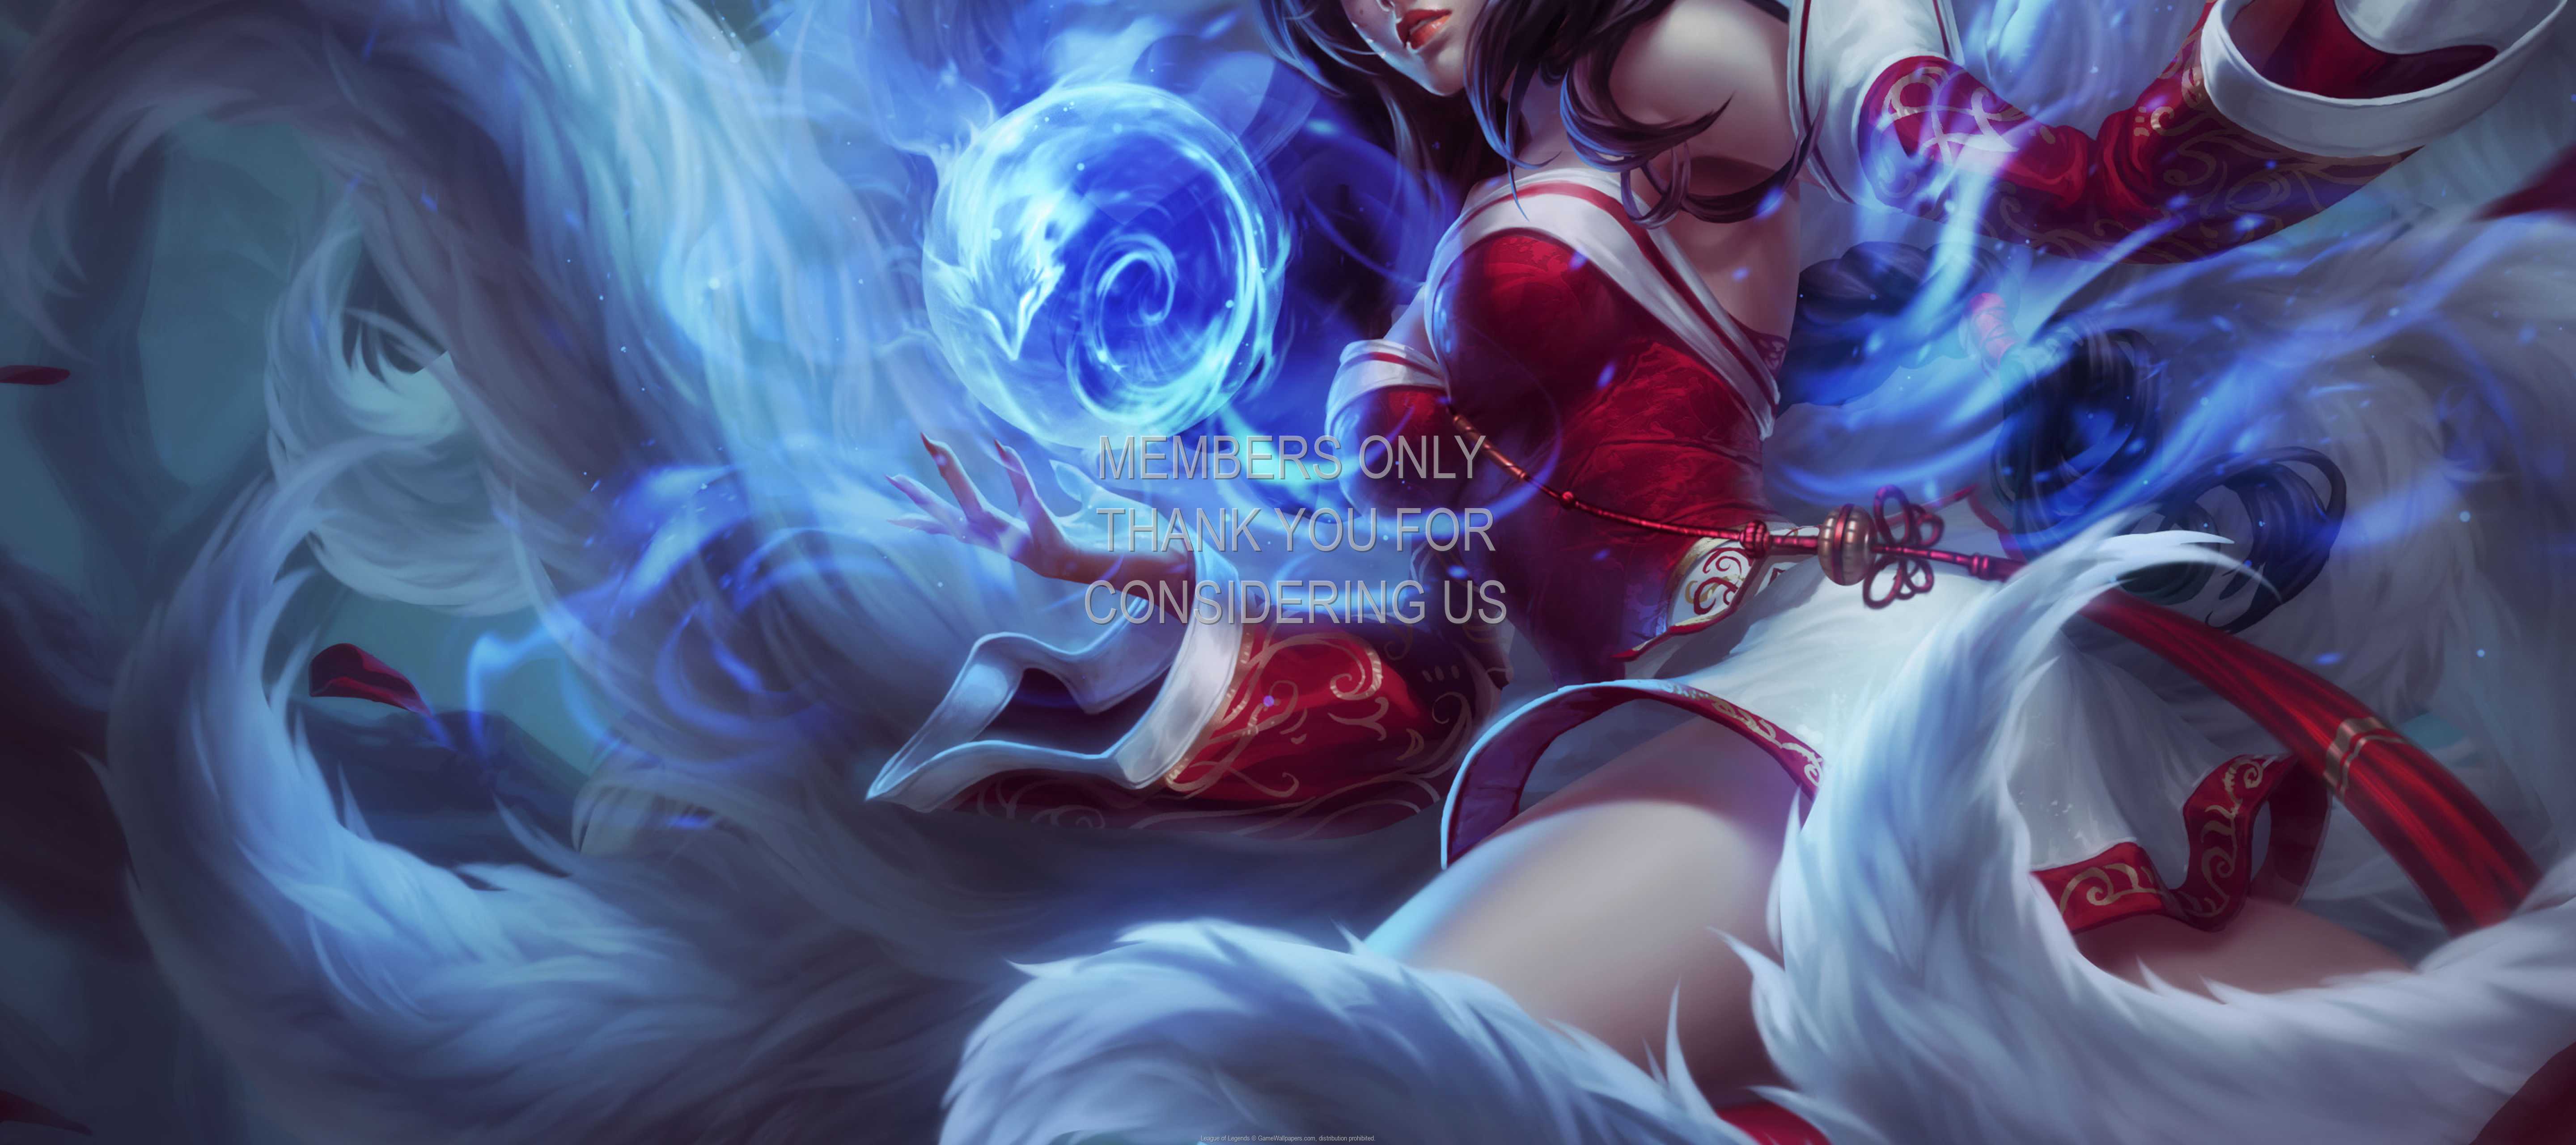 League of Legends 1440p%20Horizontal Mobile wallpaper or background 54